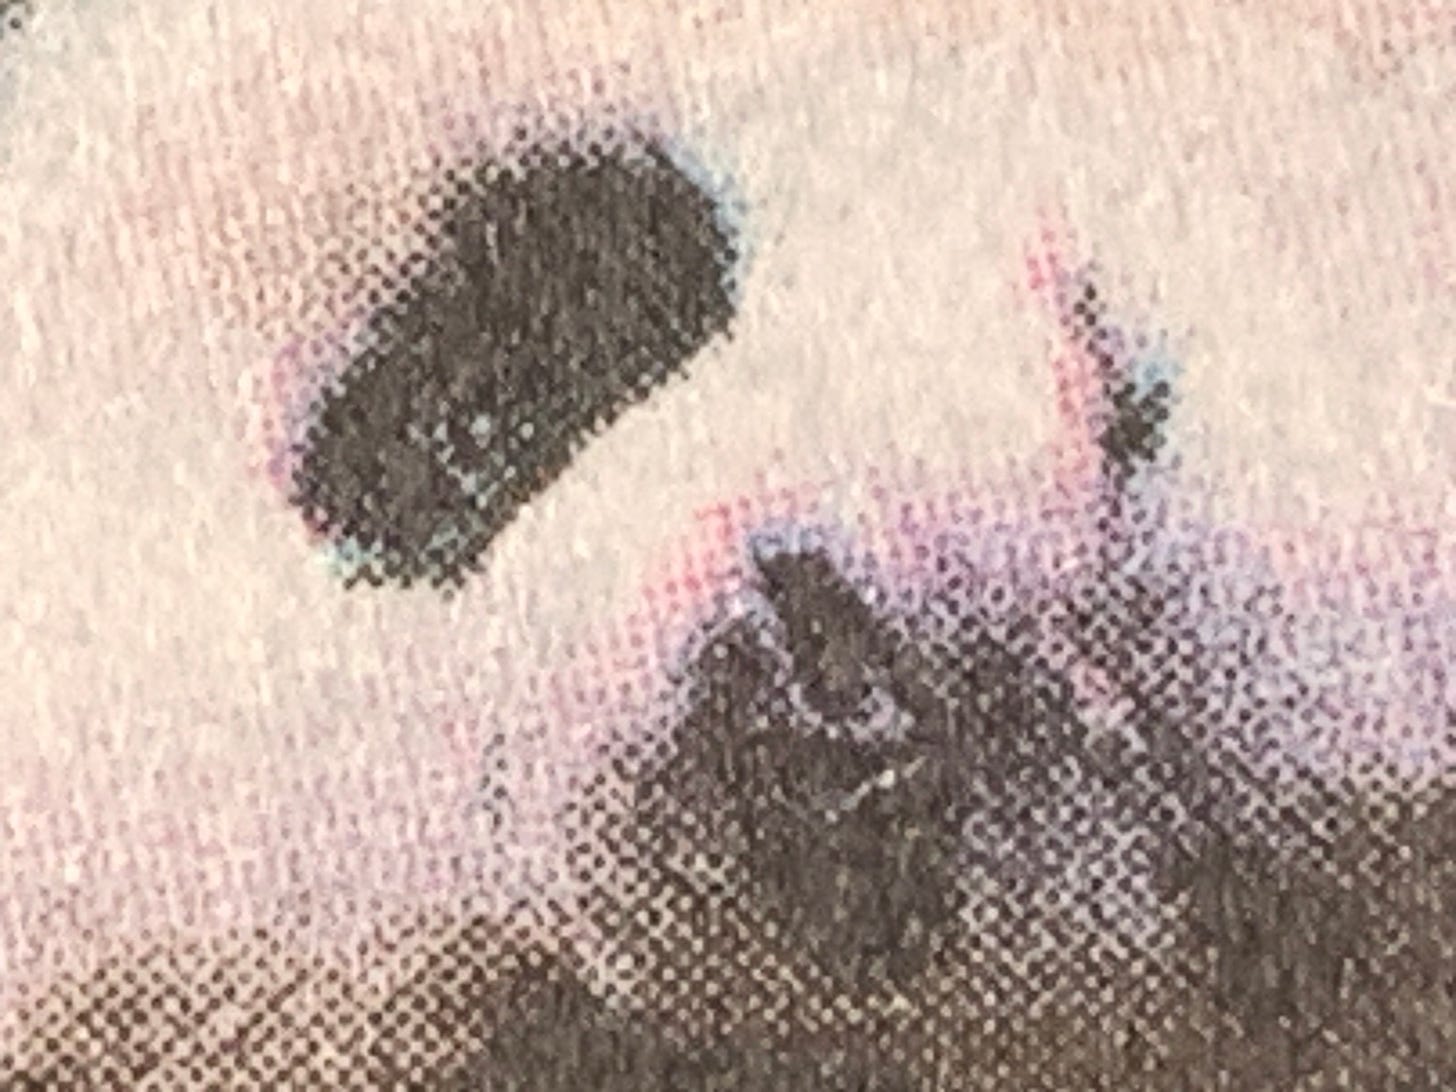 An extreme closeup detail of a photograph in the print edition of the New York Times, so the halftone dots of the printing process are enlarged. Detail contains an image of a panda lying on its side.